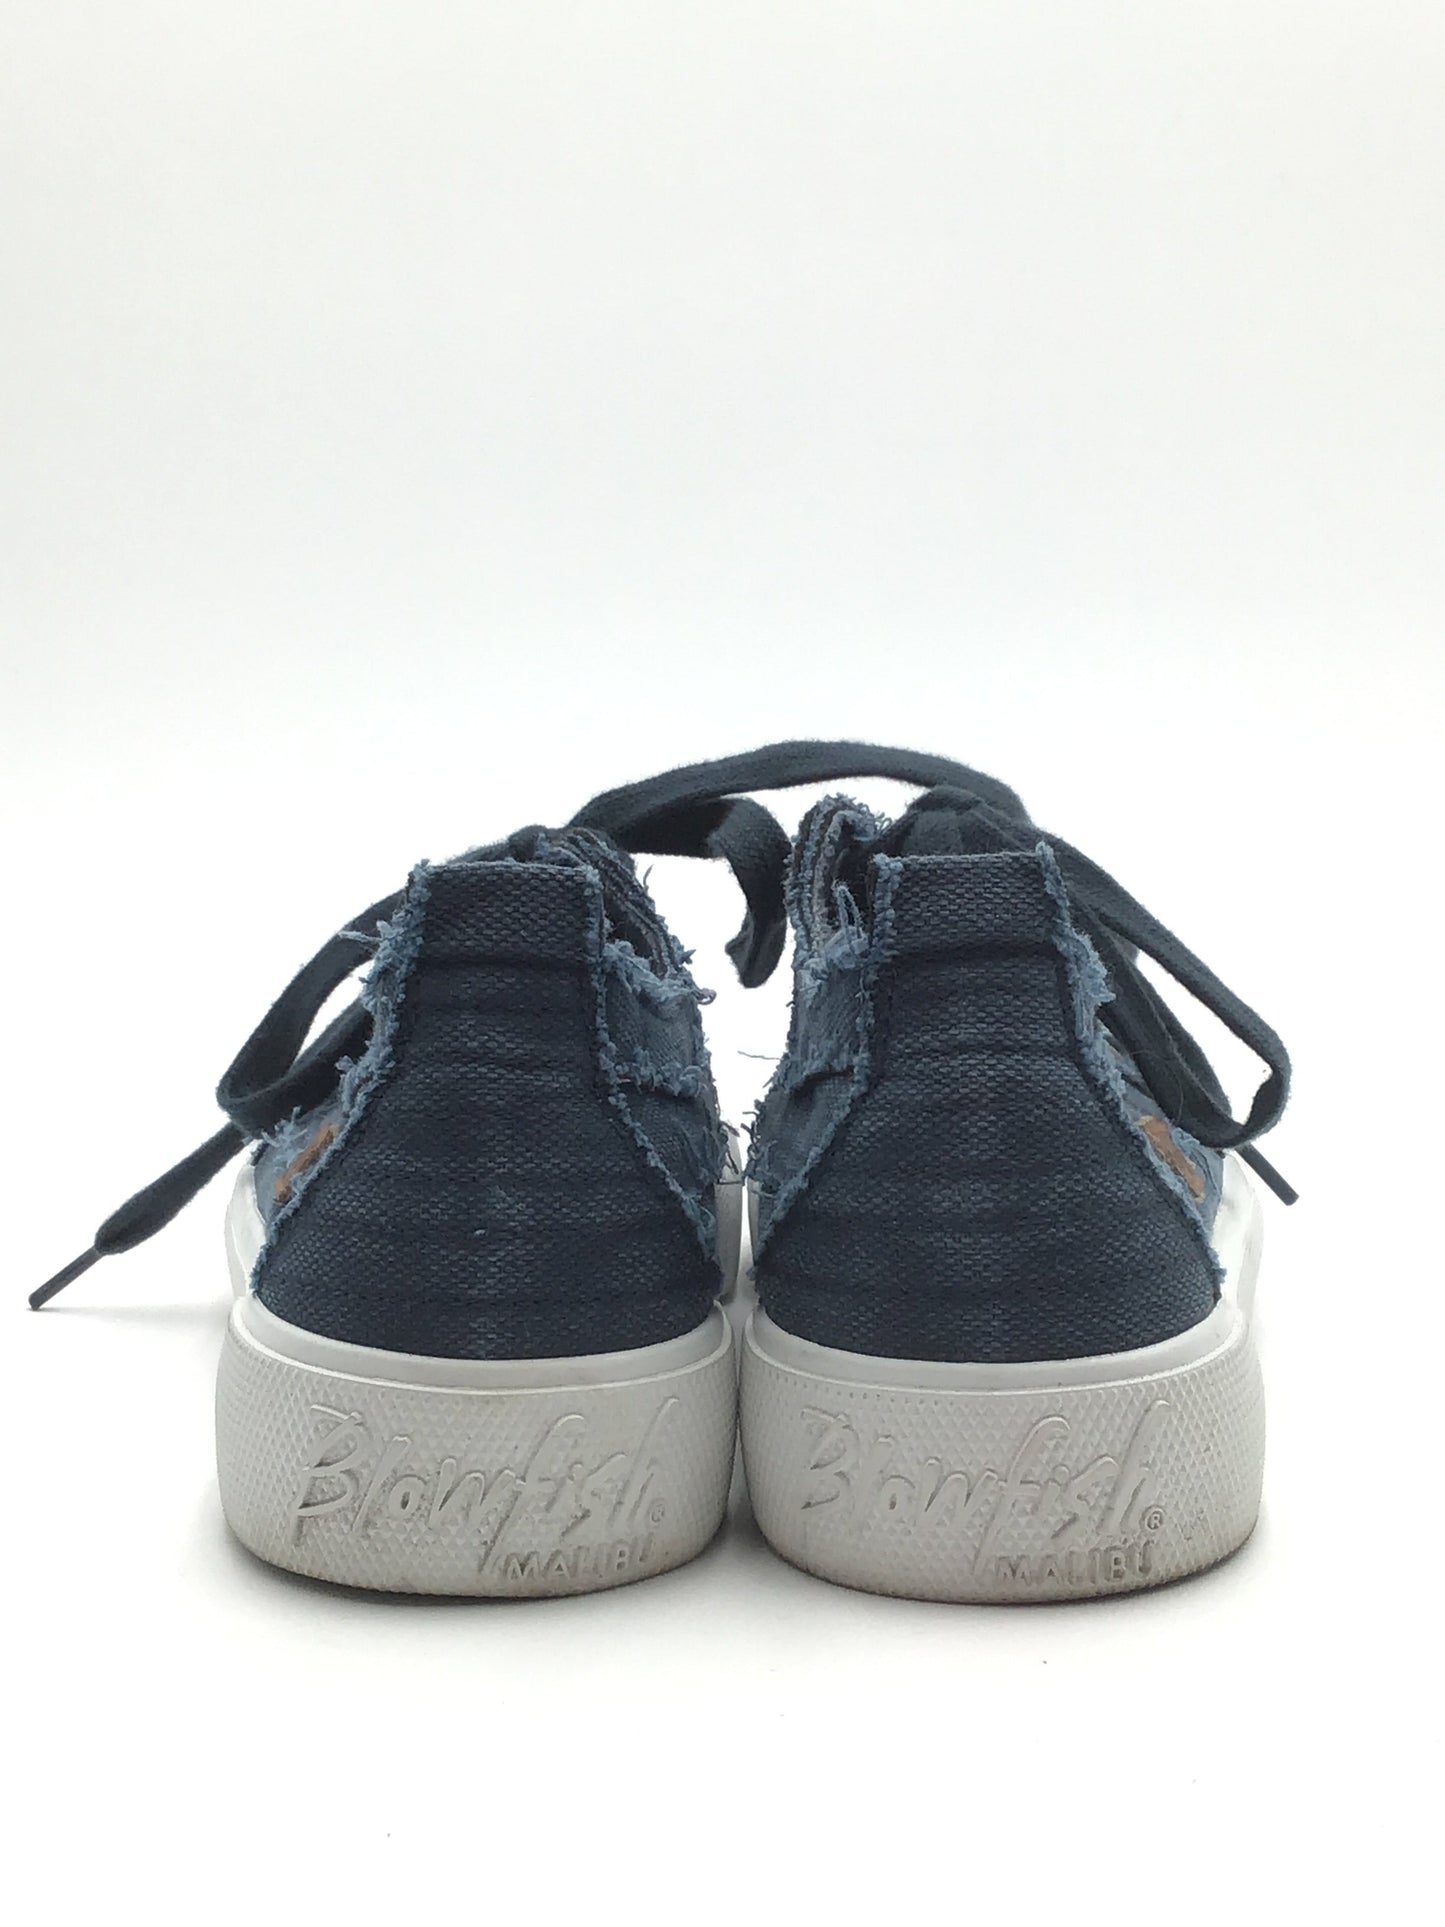 Blue Shoes Sneakers Blowfish, Size 8